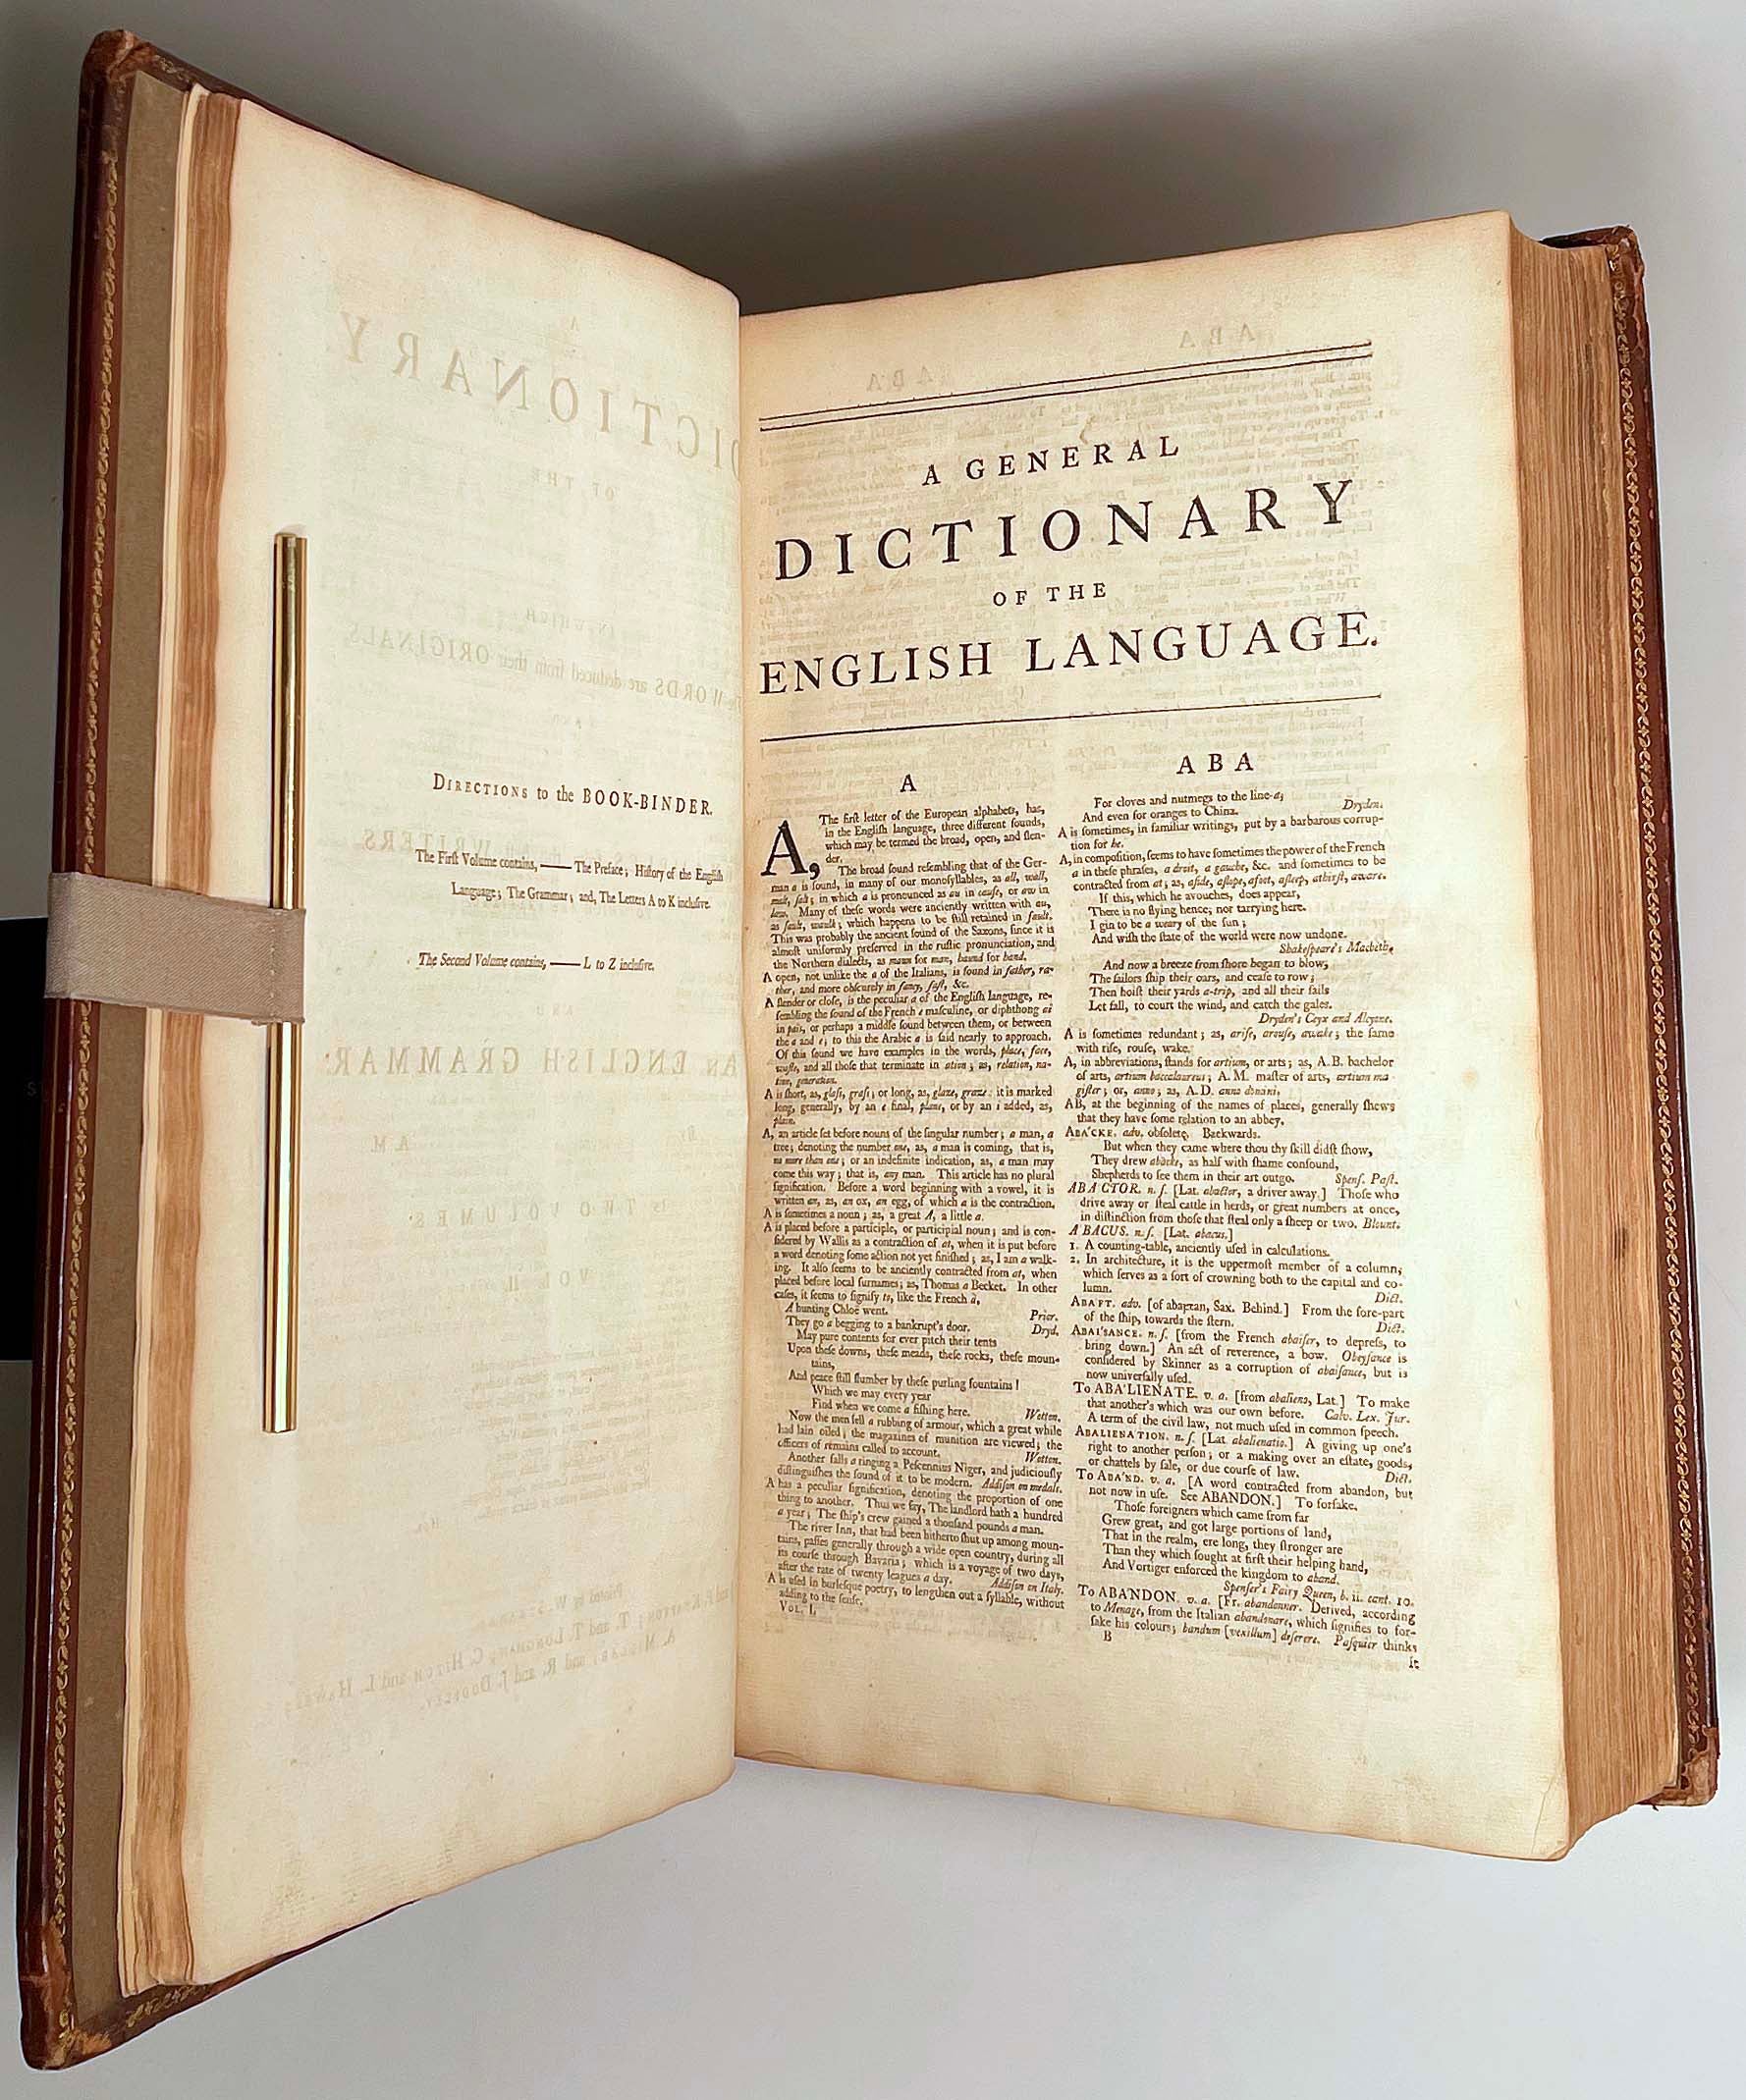 A Dictionary of the English Language SAMUEL JOHNSON First edition